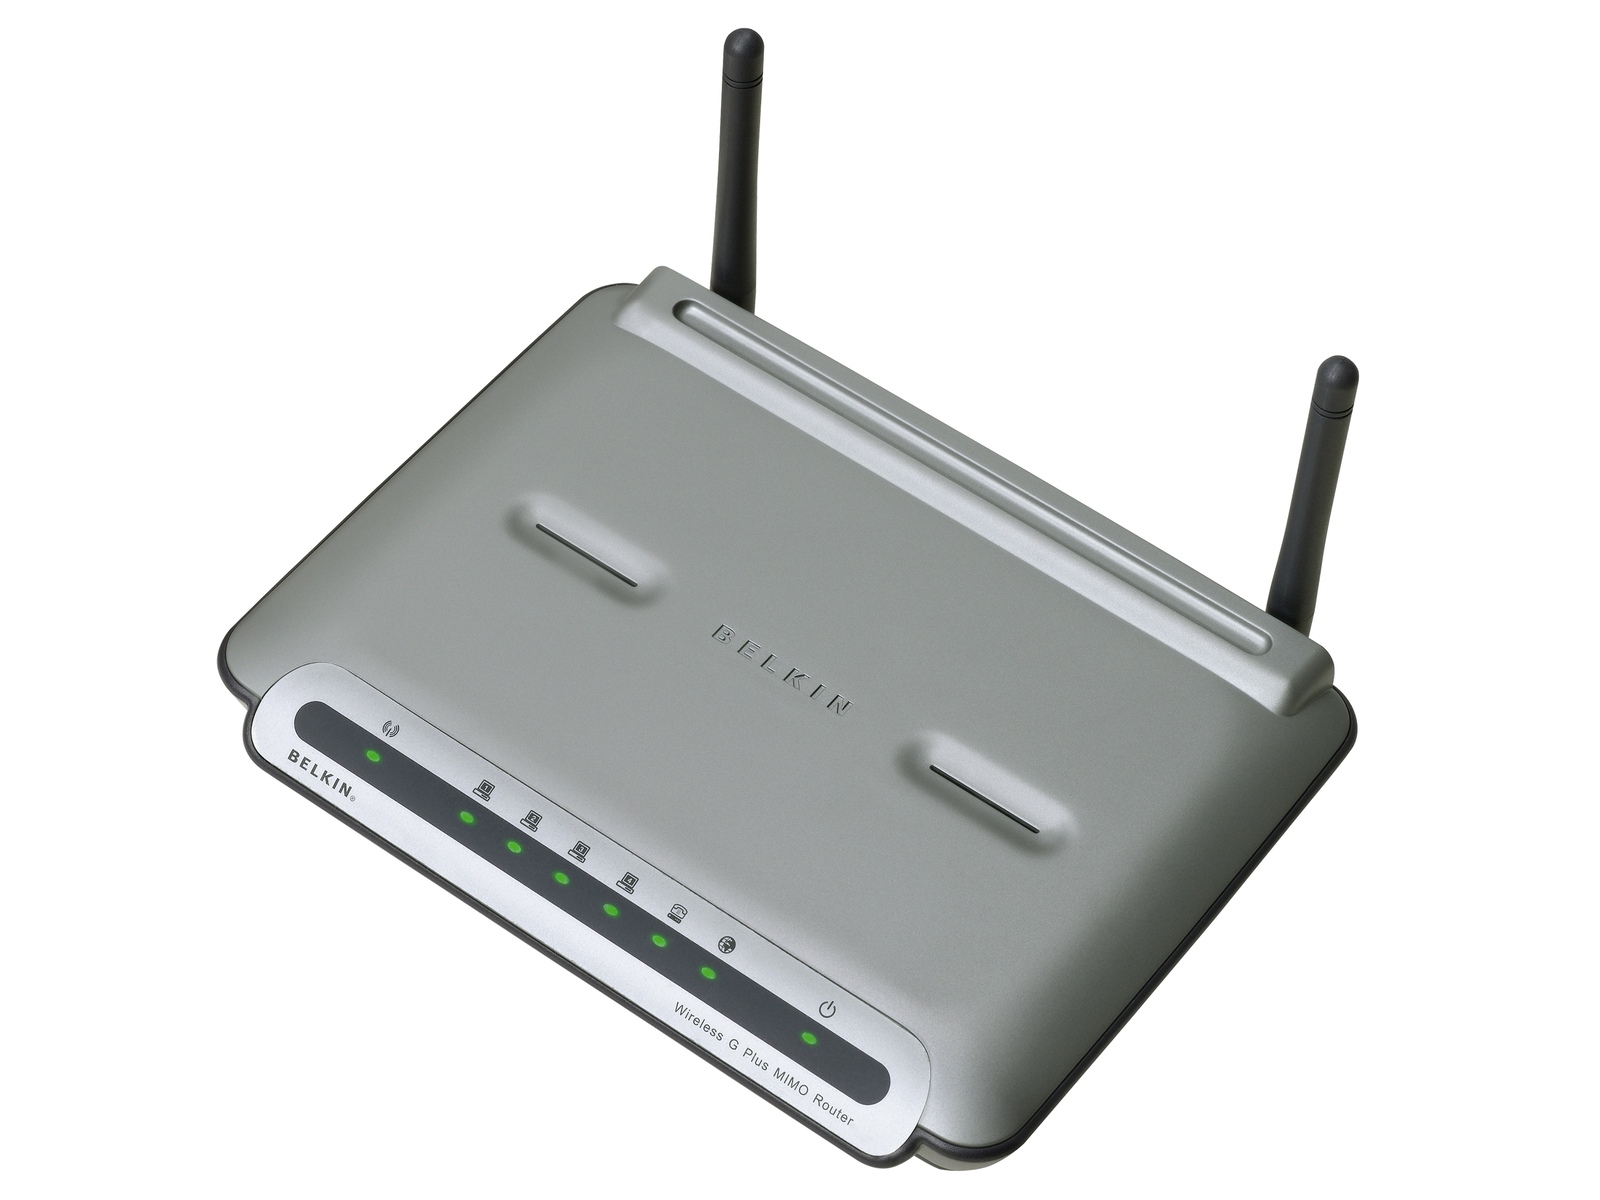 How To Log Into Belkin Wireless Router